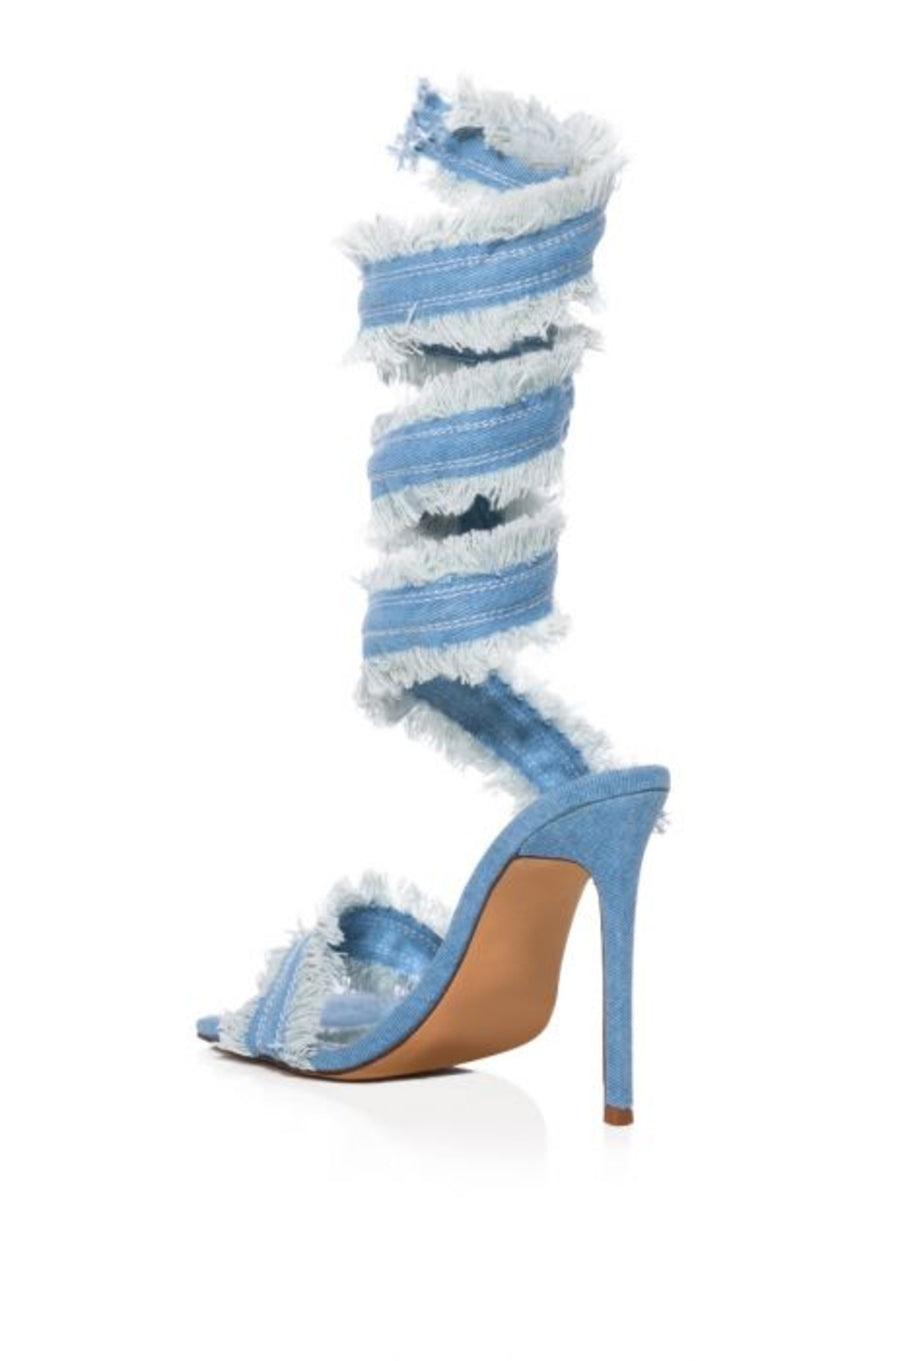 denim open toe stiletto heels with a distressed denim wrap up cord